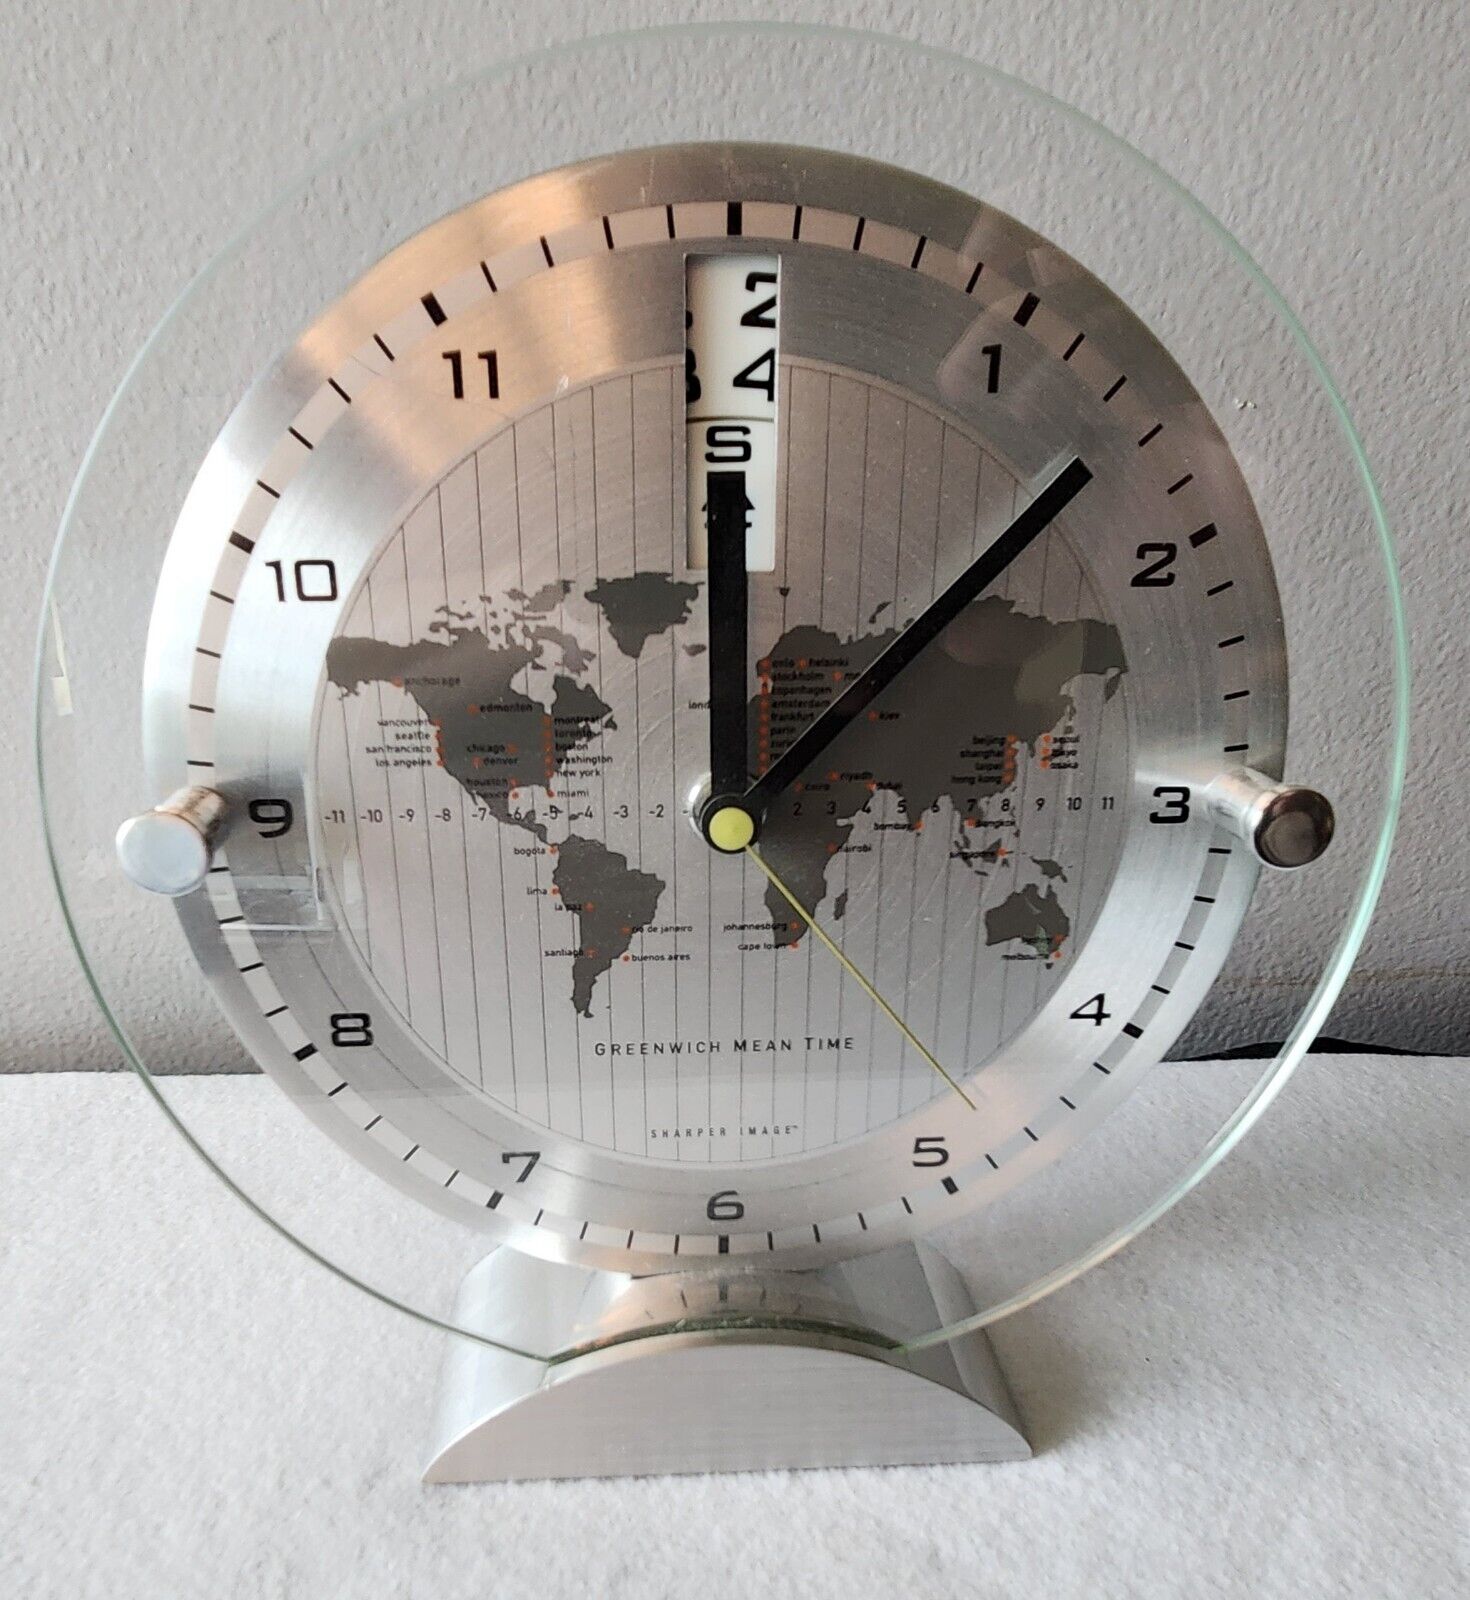 Sharper Image World Time Glass Clock Day, Date, Time Display Beautiful